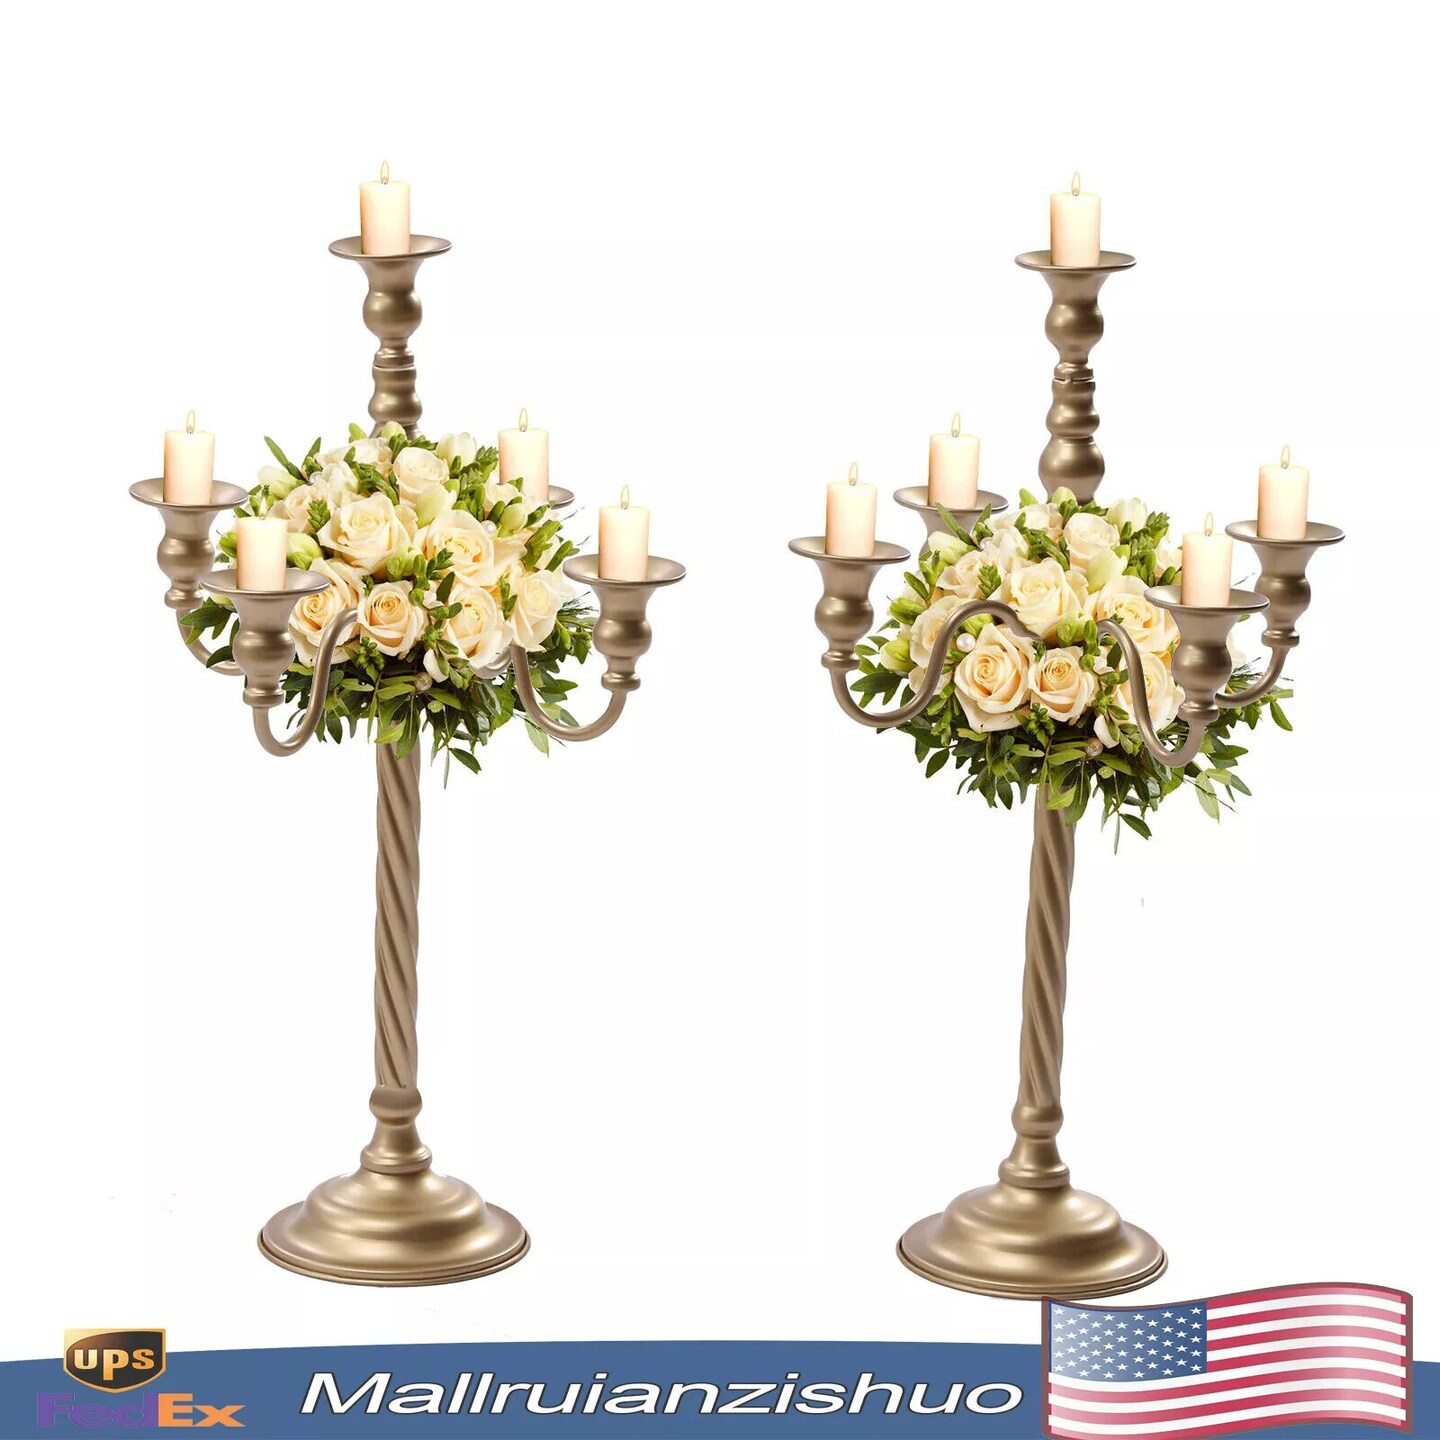 2 Pcs Gold Candelabra Candle Holder Centerpieces for Tables 5 Head Tall Candles